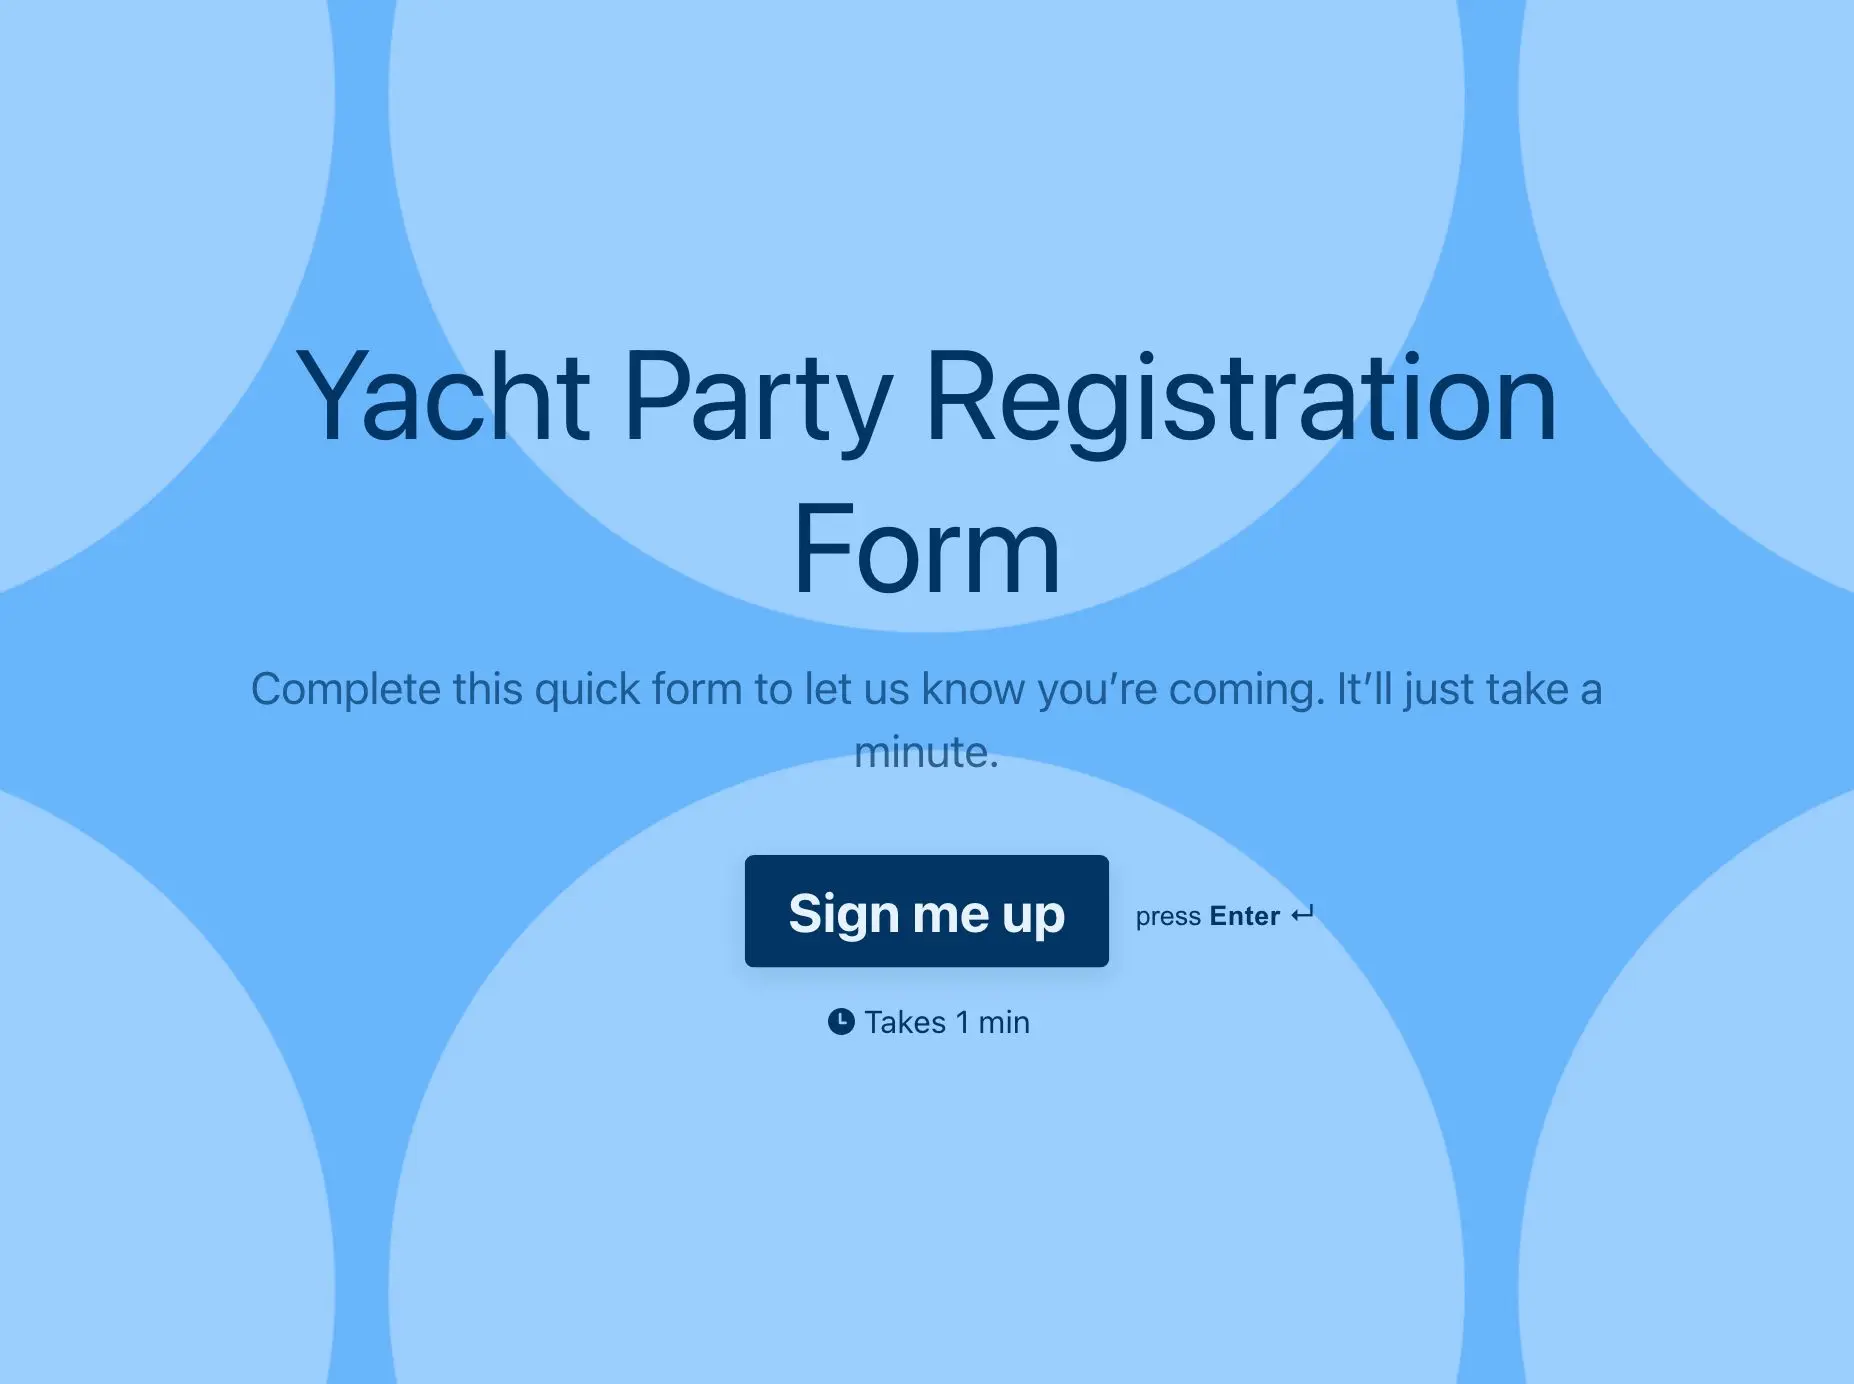 Yacht Party Registration Form Template Hero